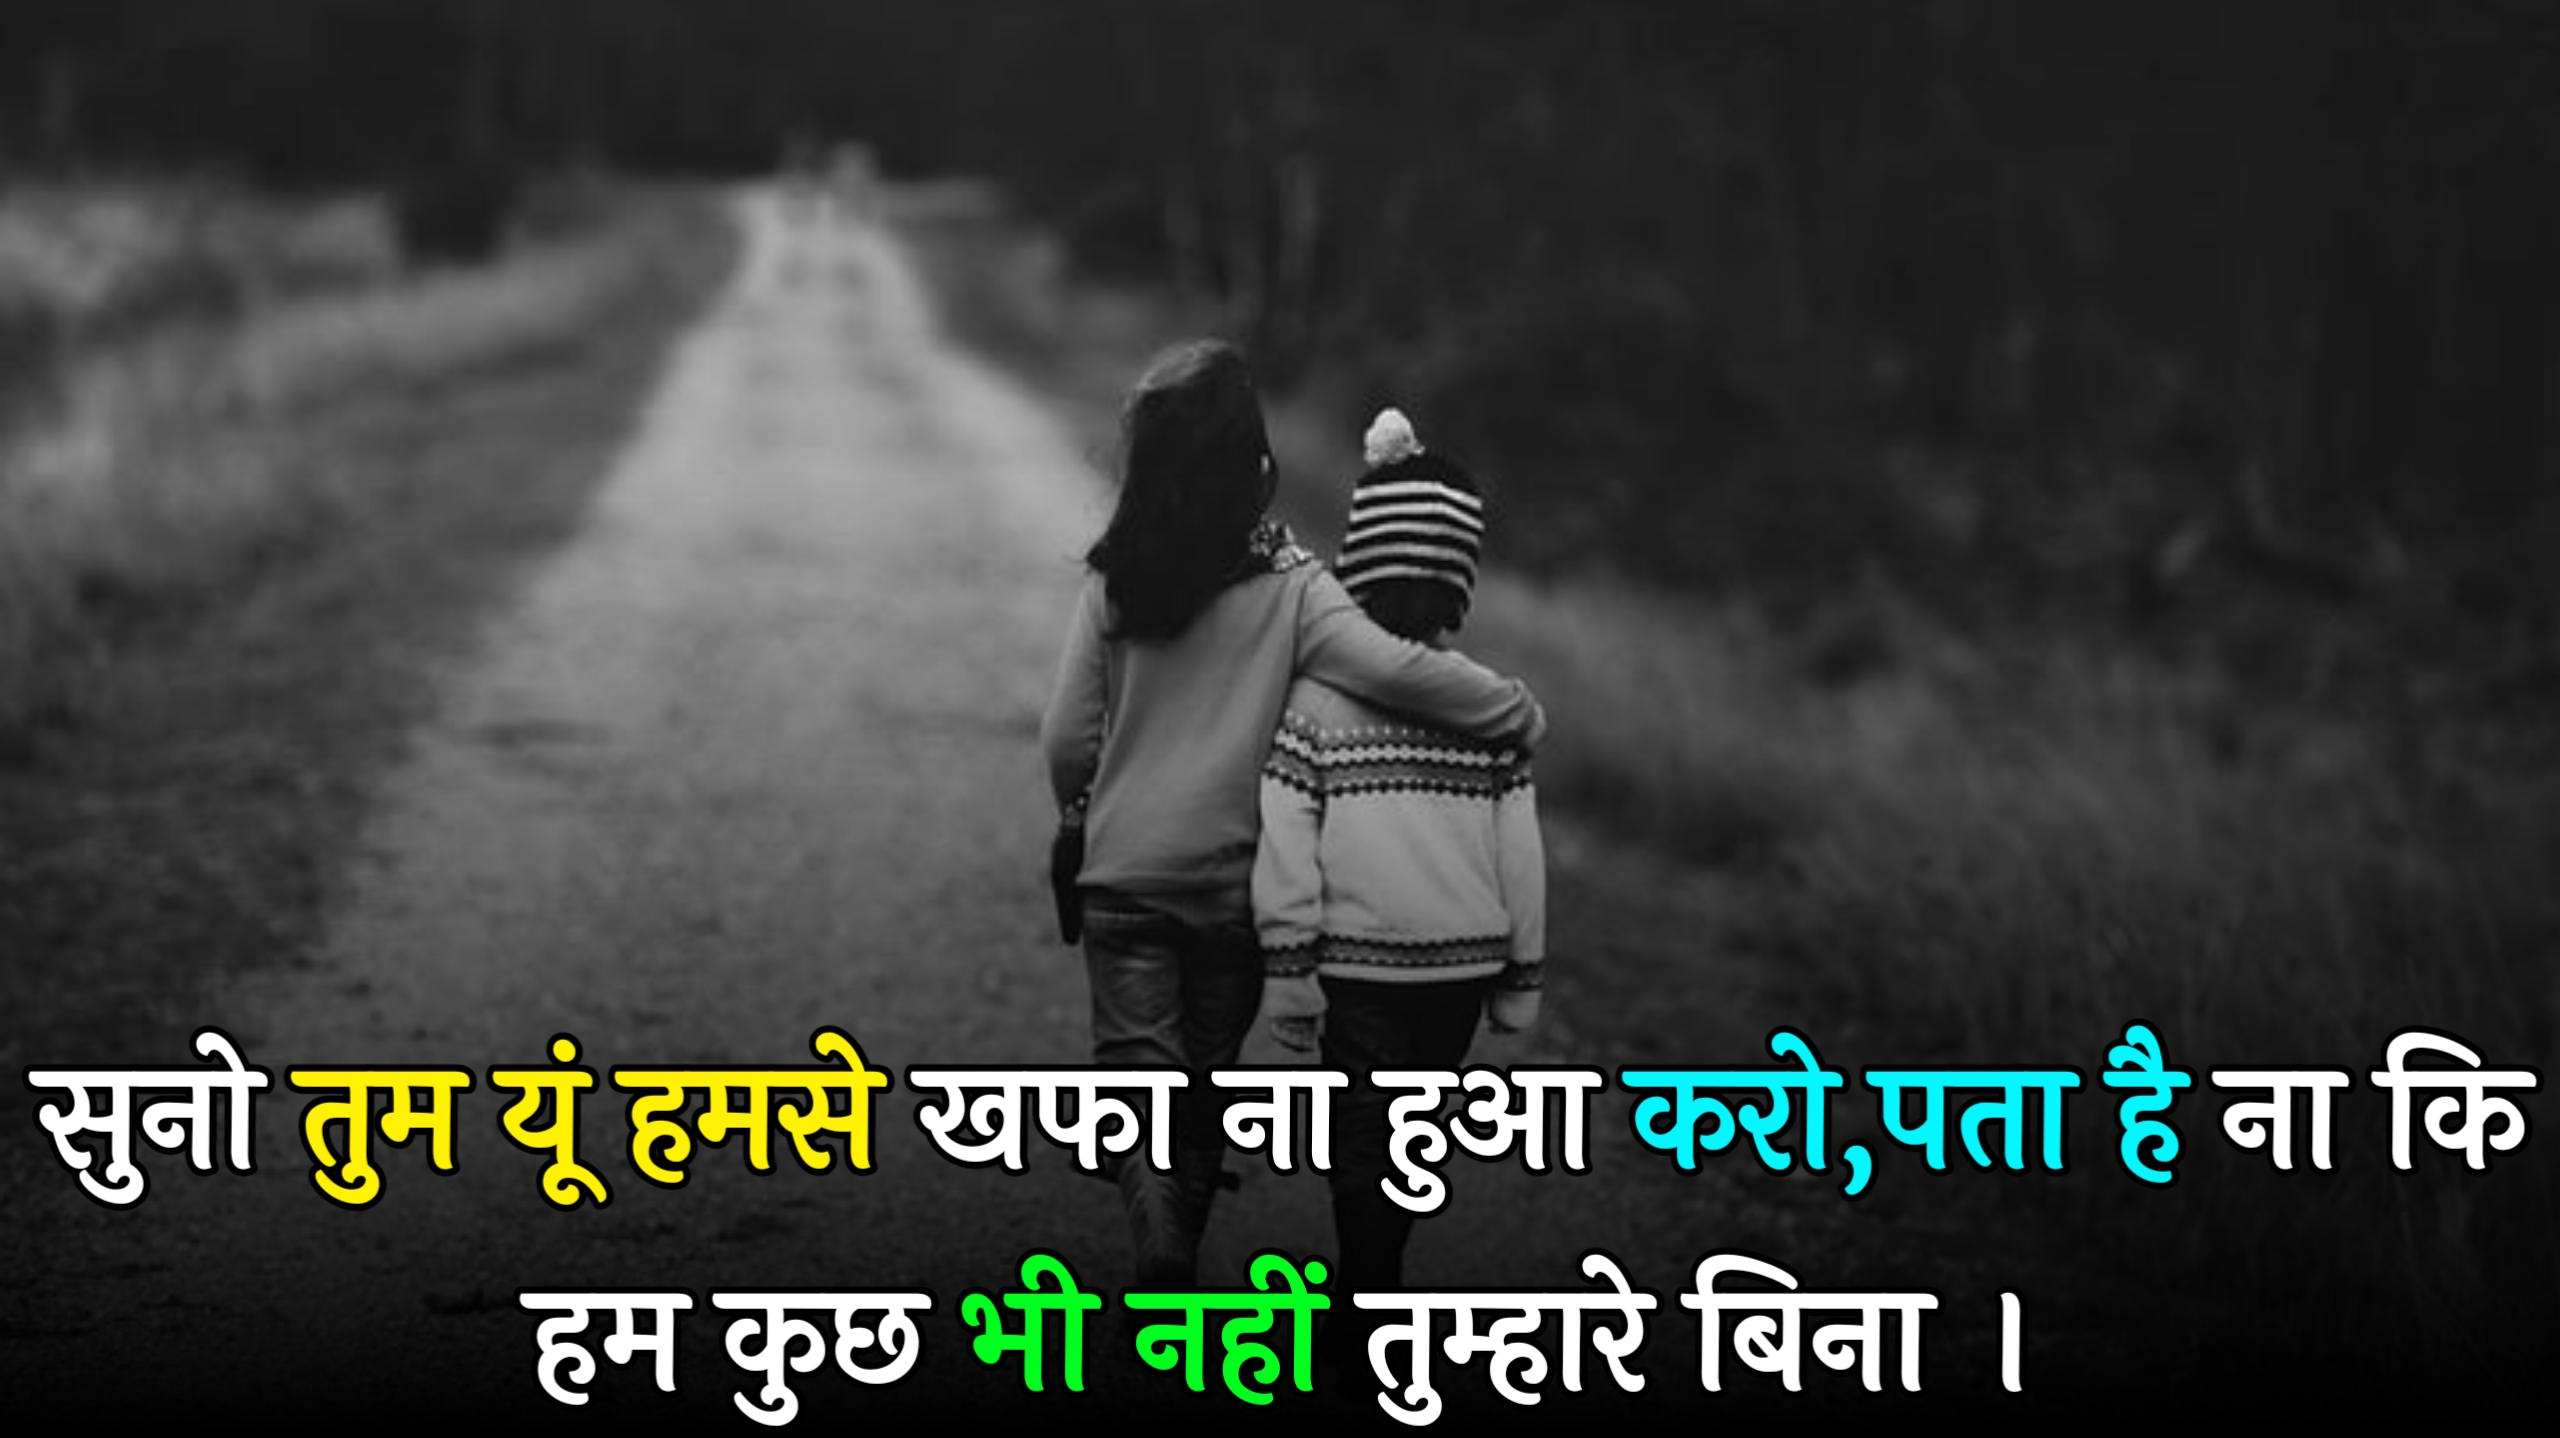 heart touching love quotes in hindi,deep heart touching love quotes in hindi,emotional heart touching love quotes in hindi,heart touching love quotes in hindi english,sad heart touching love quotes in hindi,heart touching true love heart touching love quotes in hindi,love quotes in hindi 2023